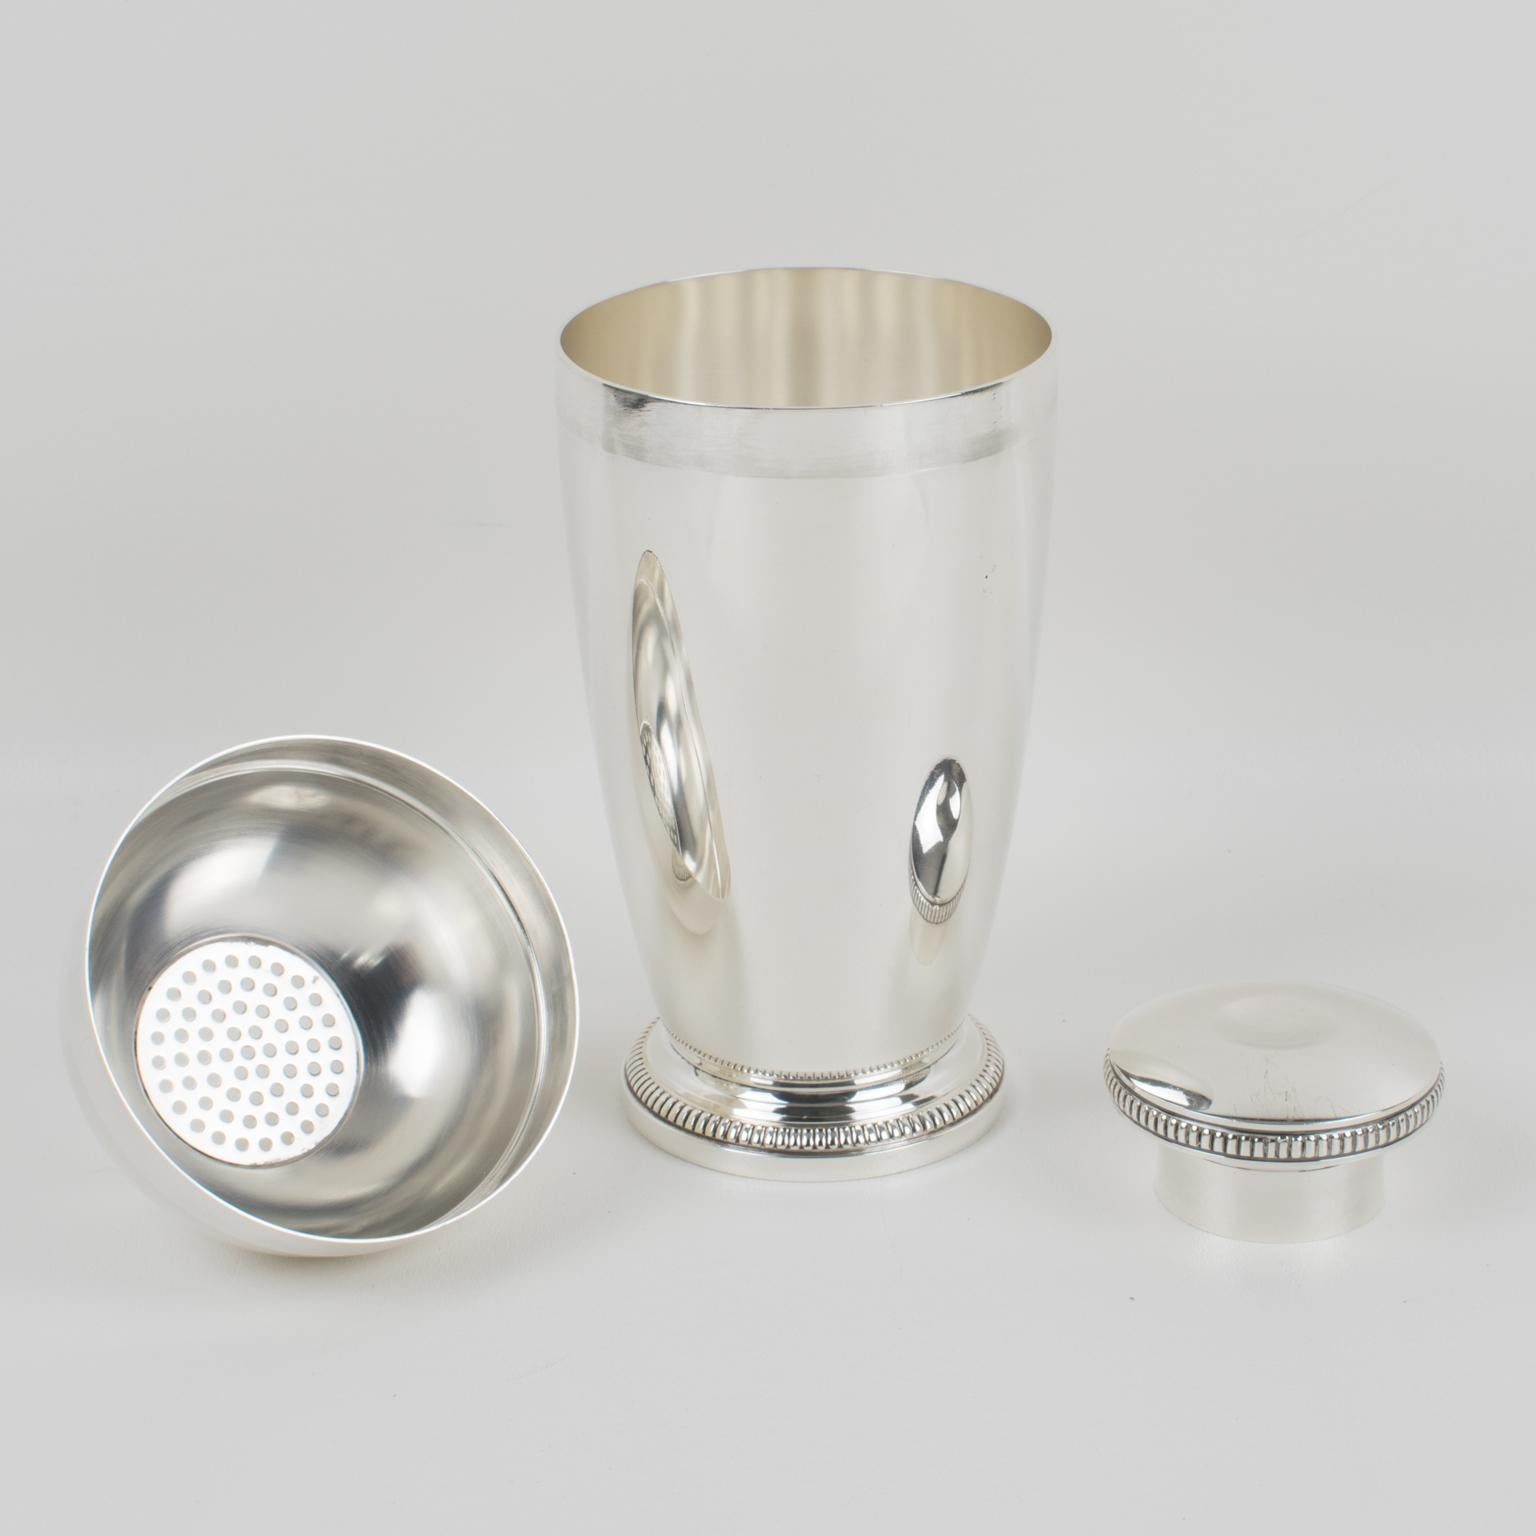 French Art Deco Silver Plate Cocktail Shaker by Saint Medard France